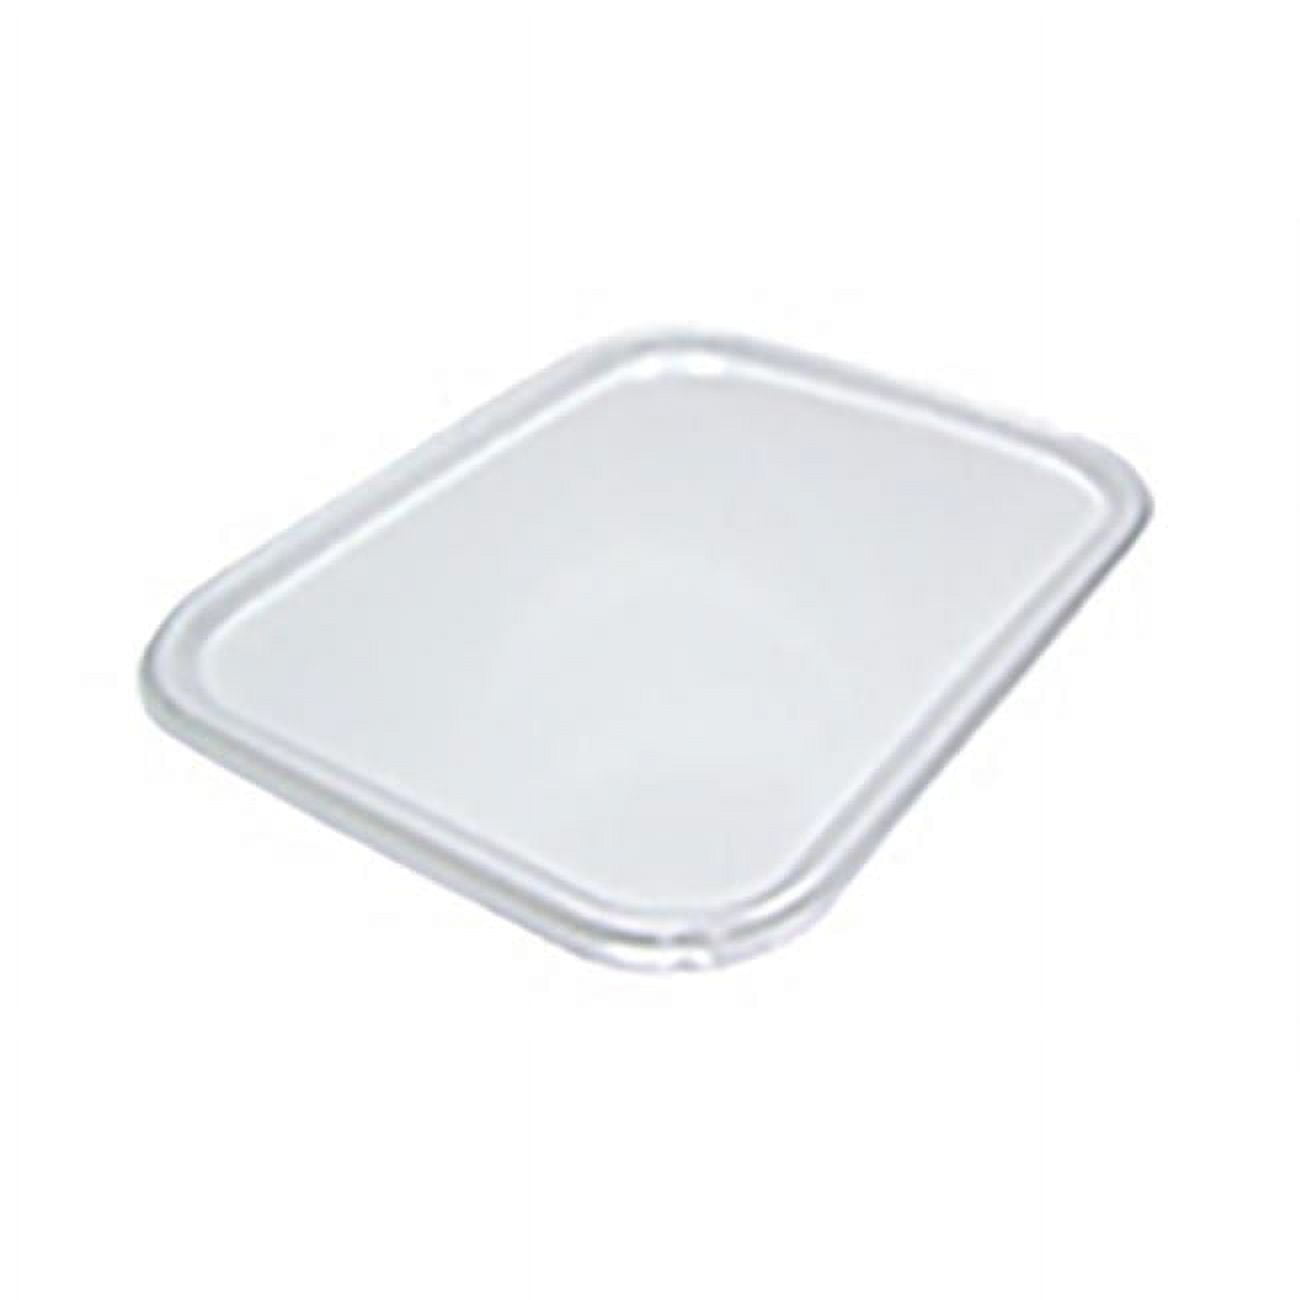 0th100340000 Cpc 9 X 12 In. Tray, Satin White - Case Of 250